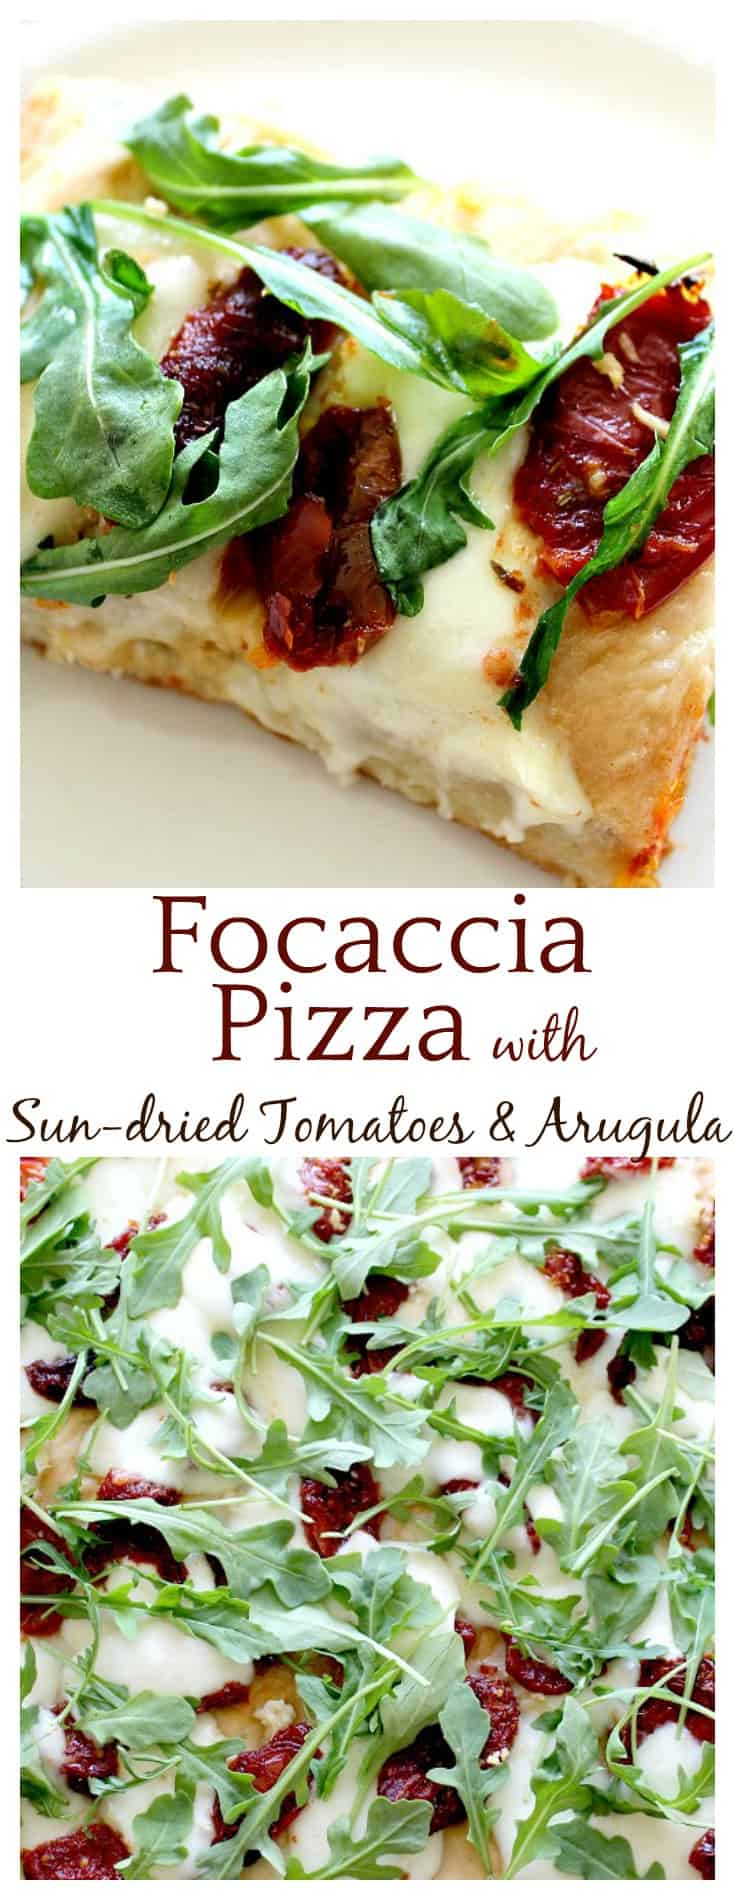 This focaccia pizza crust recipe is the perfect base for fresh mozzarella, sun-dried tomatoes, and arugula! Even the kids ate it and loved it! 